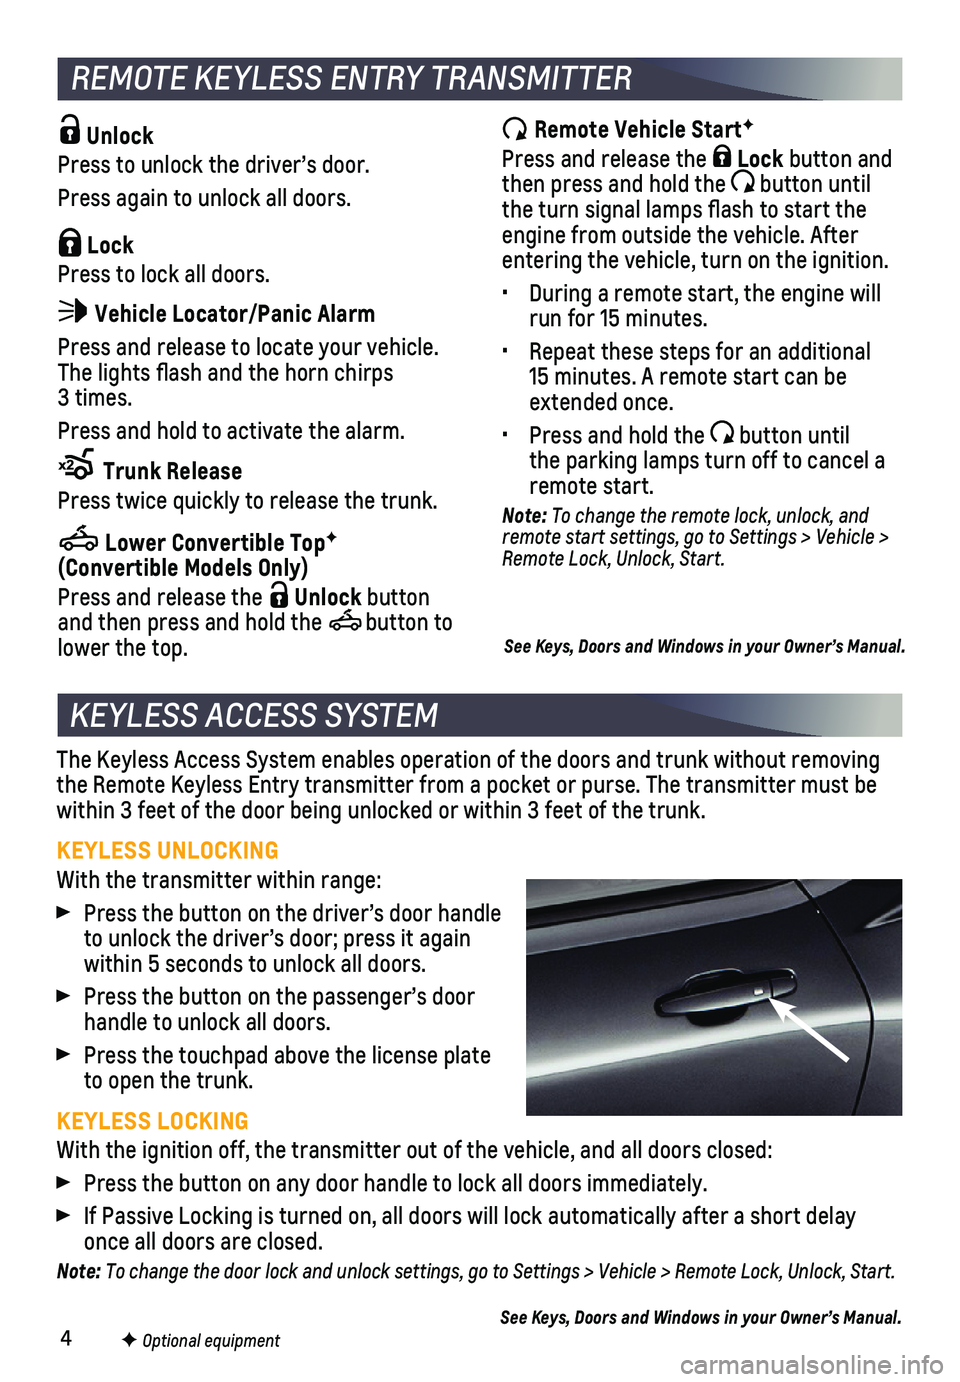 CHEVROLET CAMARO 2020  Owners Manual 4
The Keyless Access System enables operation of the doors and trunk witho\
ut removing the Remote Keyless Entry transmitter from a pocket or purse. The transmi\
tter must be within 3 feet of the door